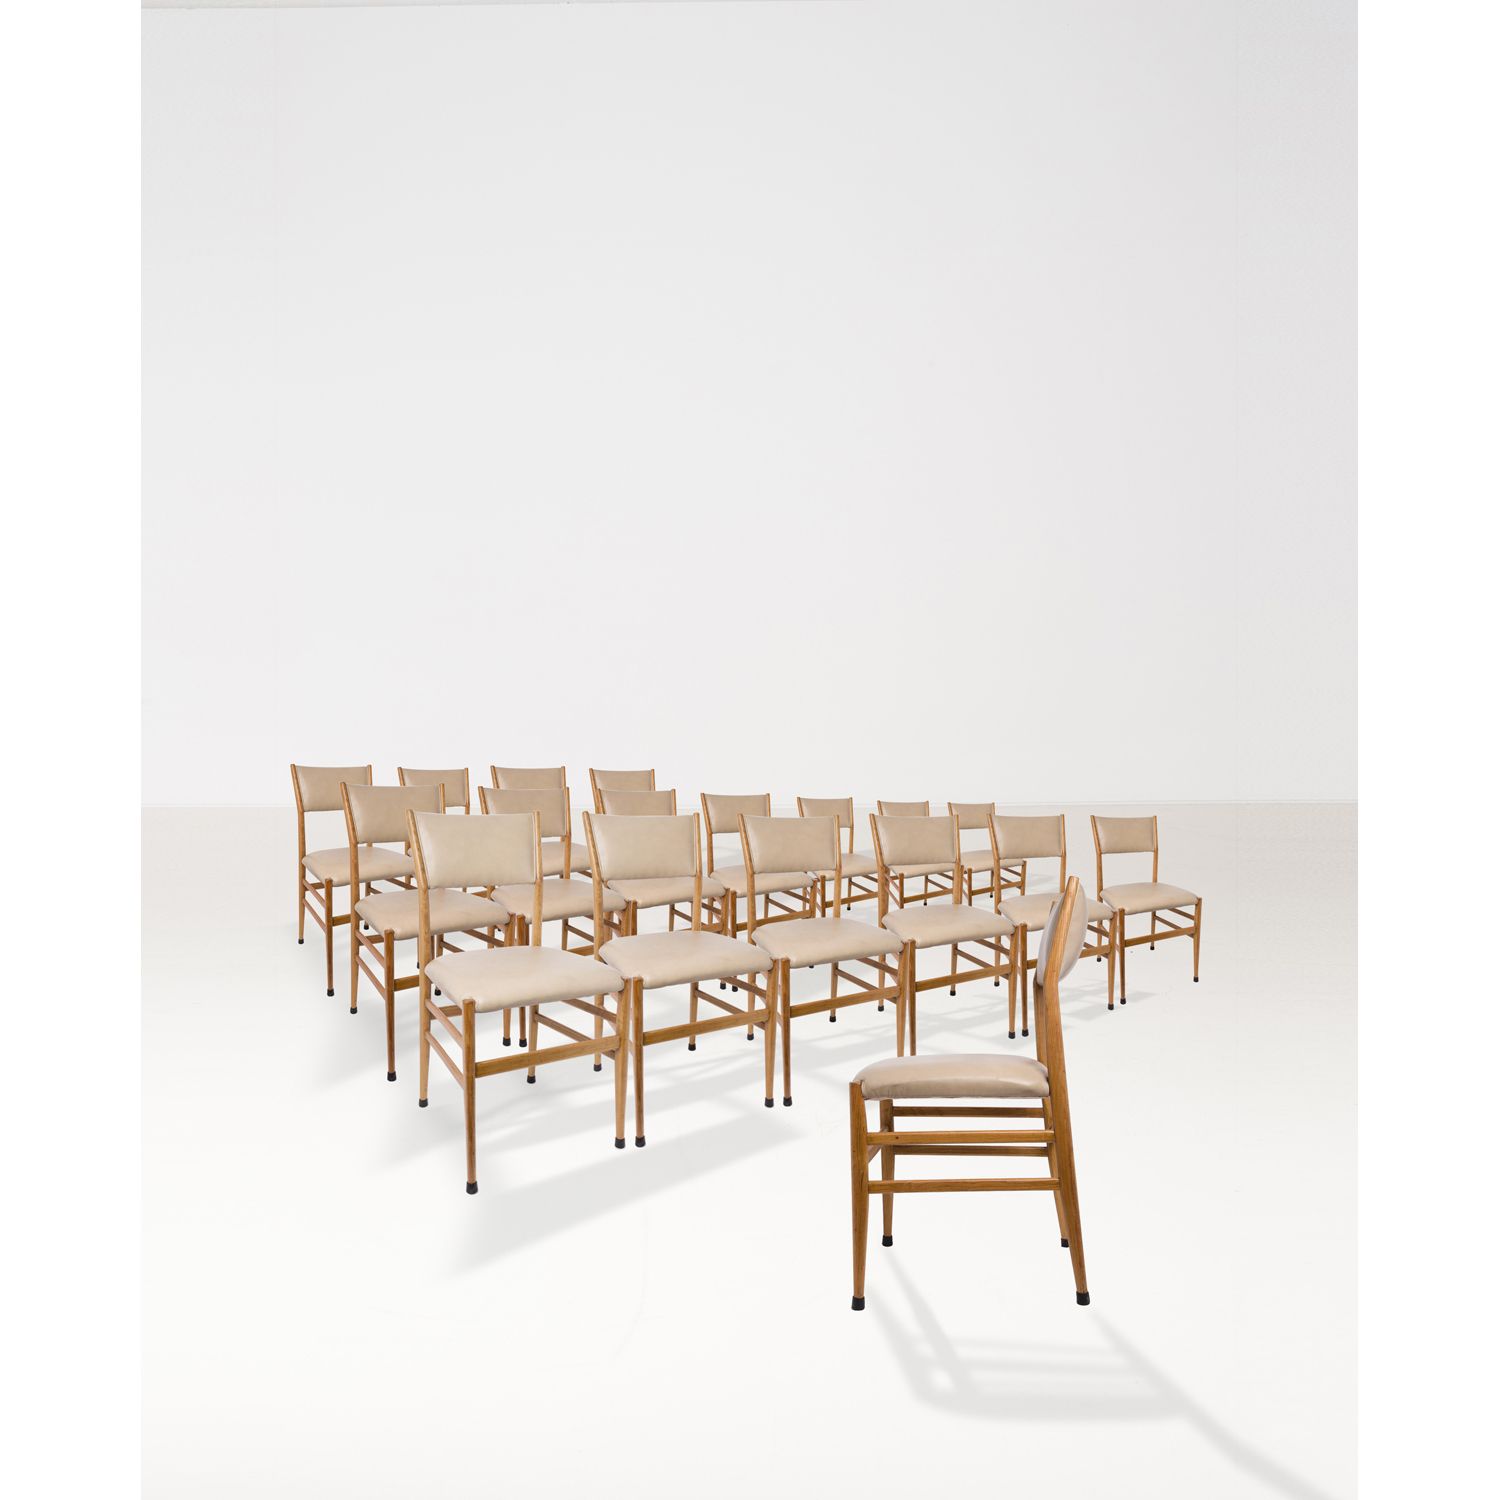 Null Gio Ponti (1891-1979)

Model n° 643-3

Set of eighteen chairs

Ash wood and&hellip;